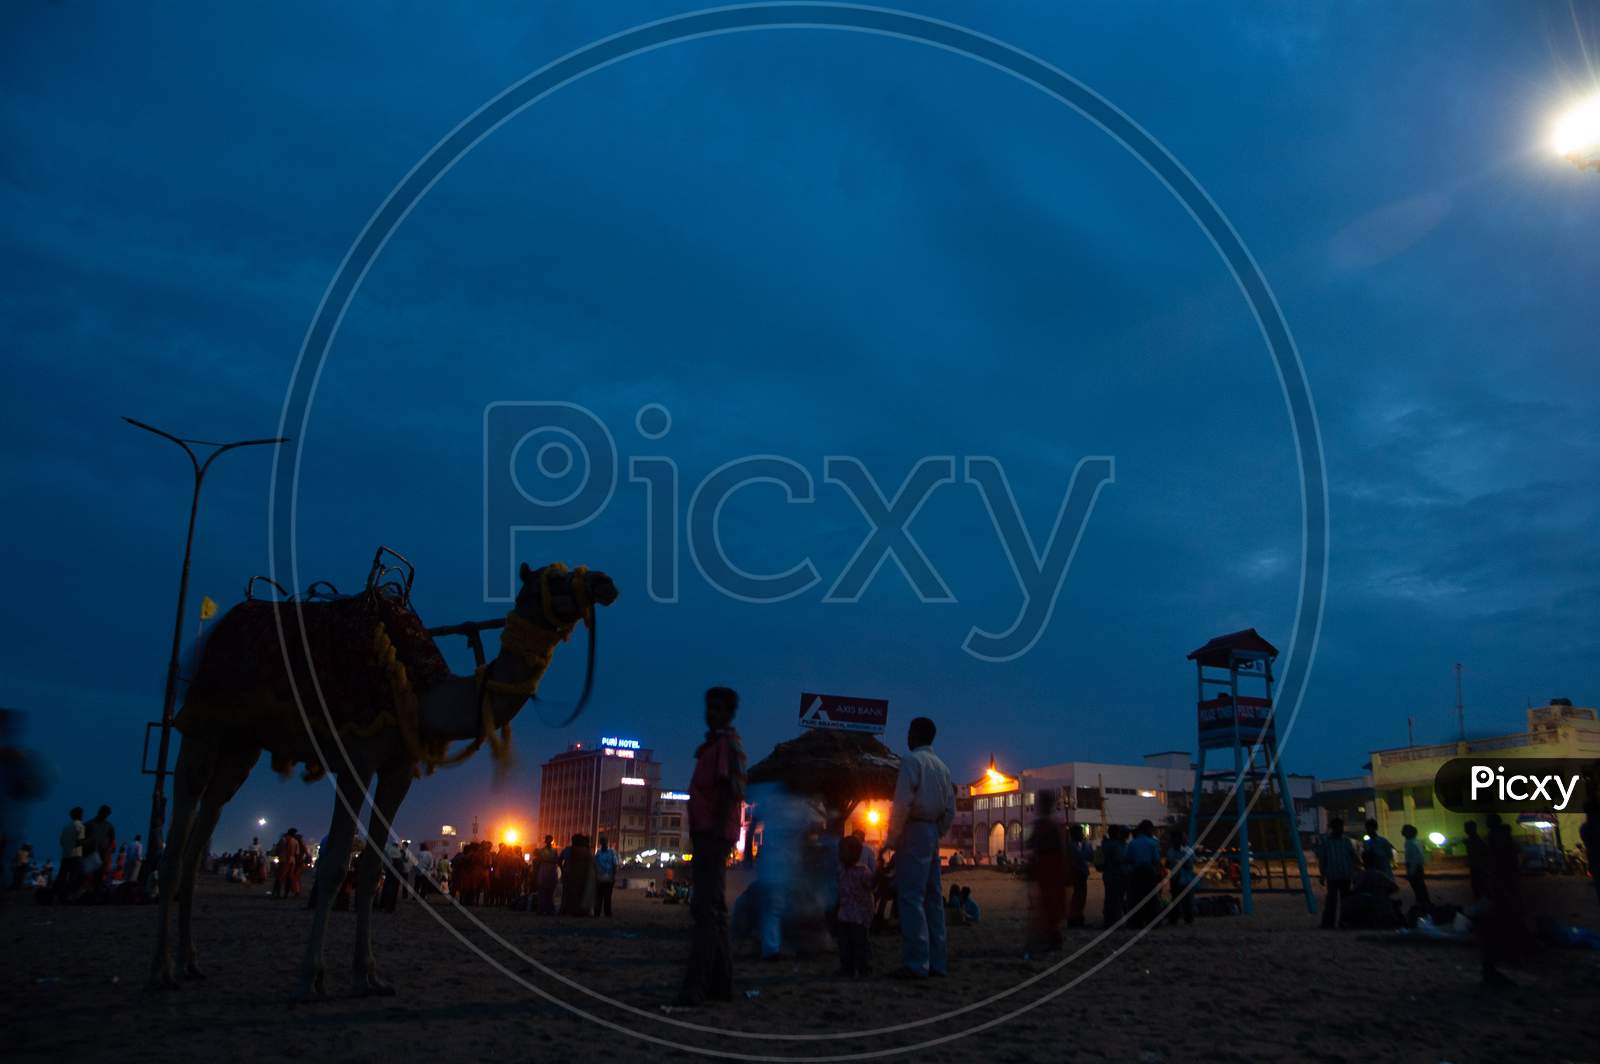 A Camel by the beach during late evening